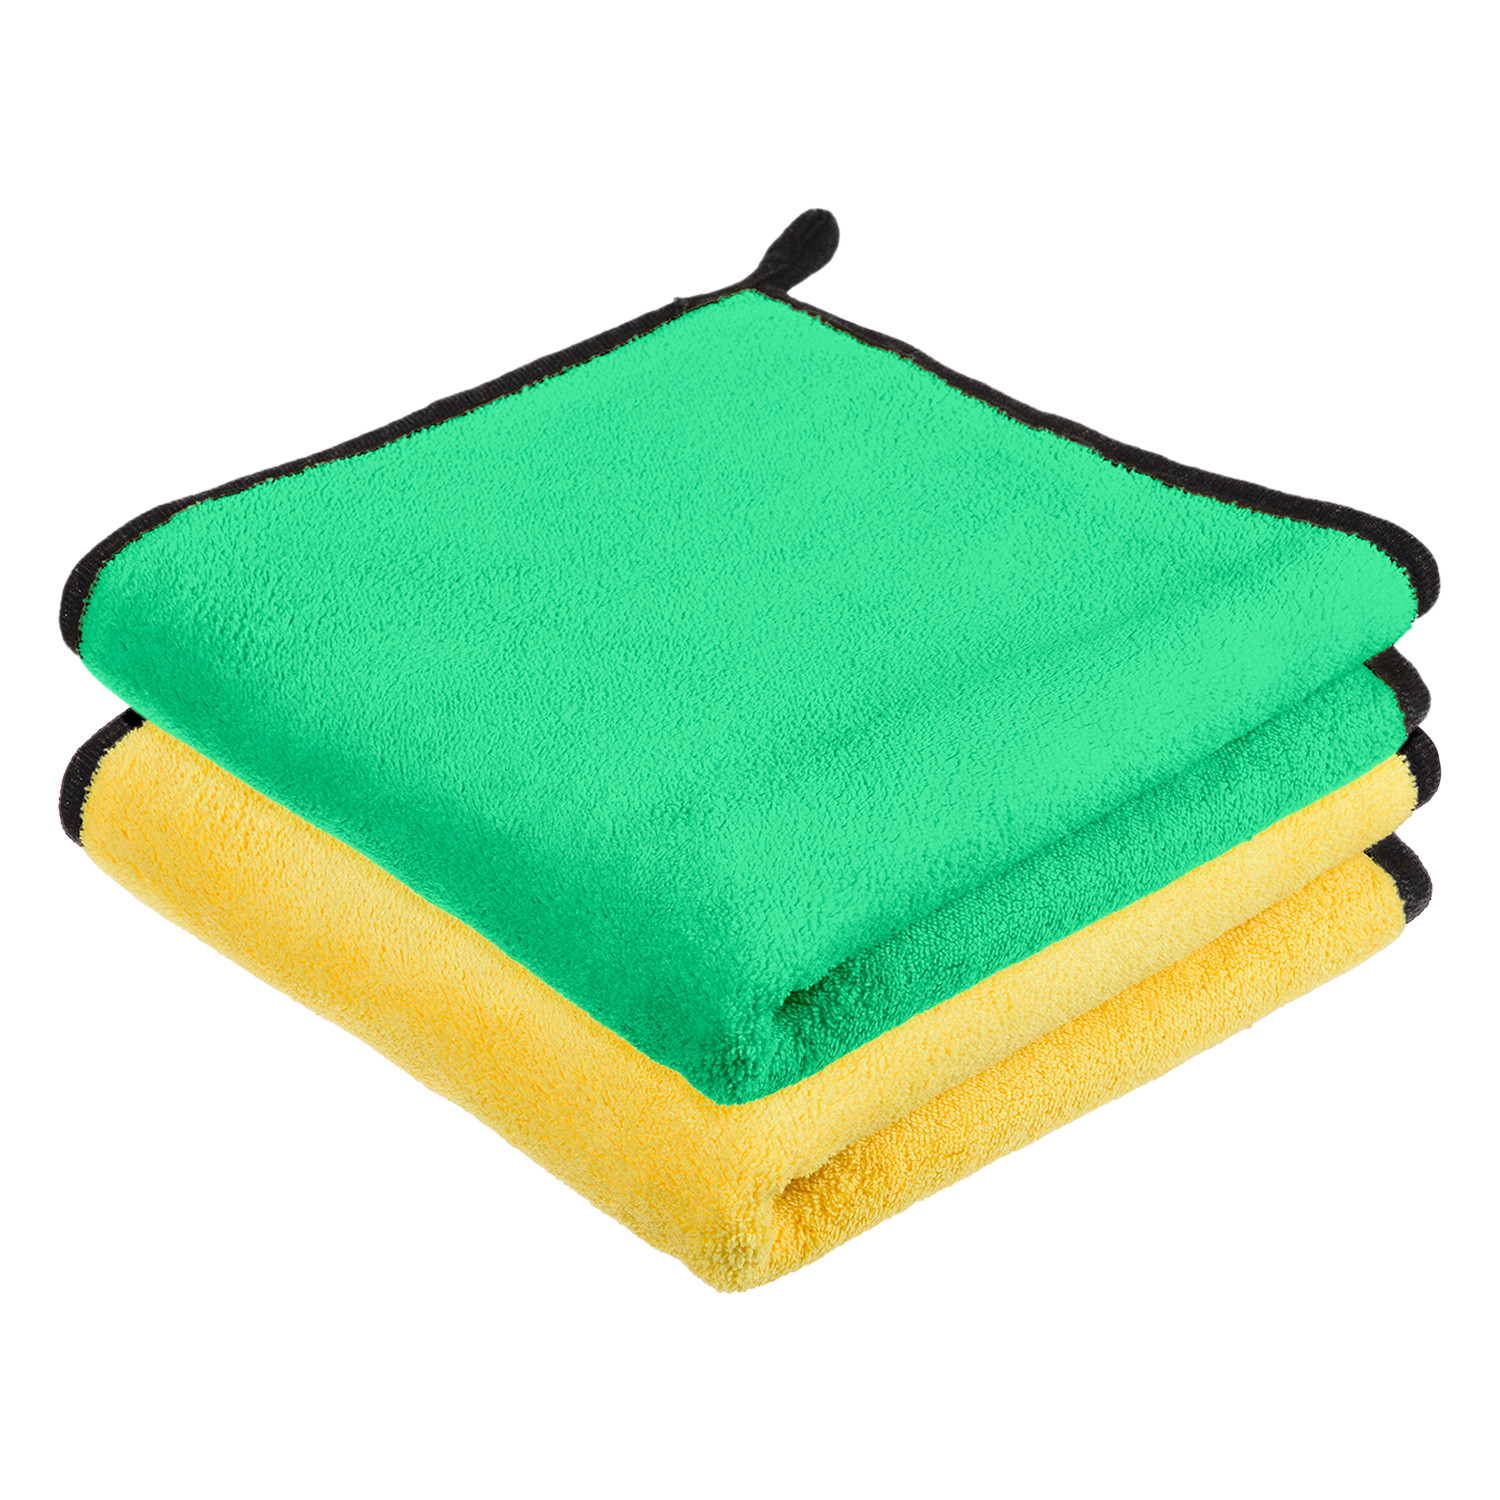 Kuber Industries Cleaning Towel|Microfiber Reusable Cloths|Highly Absorbent Washable Towel for Kitchen With Hanging Loop|Car|Window|40x40 Cm|Pack of 2 (Multi)